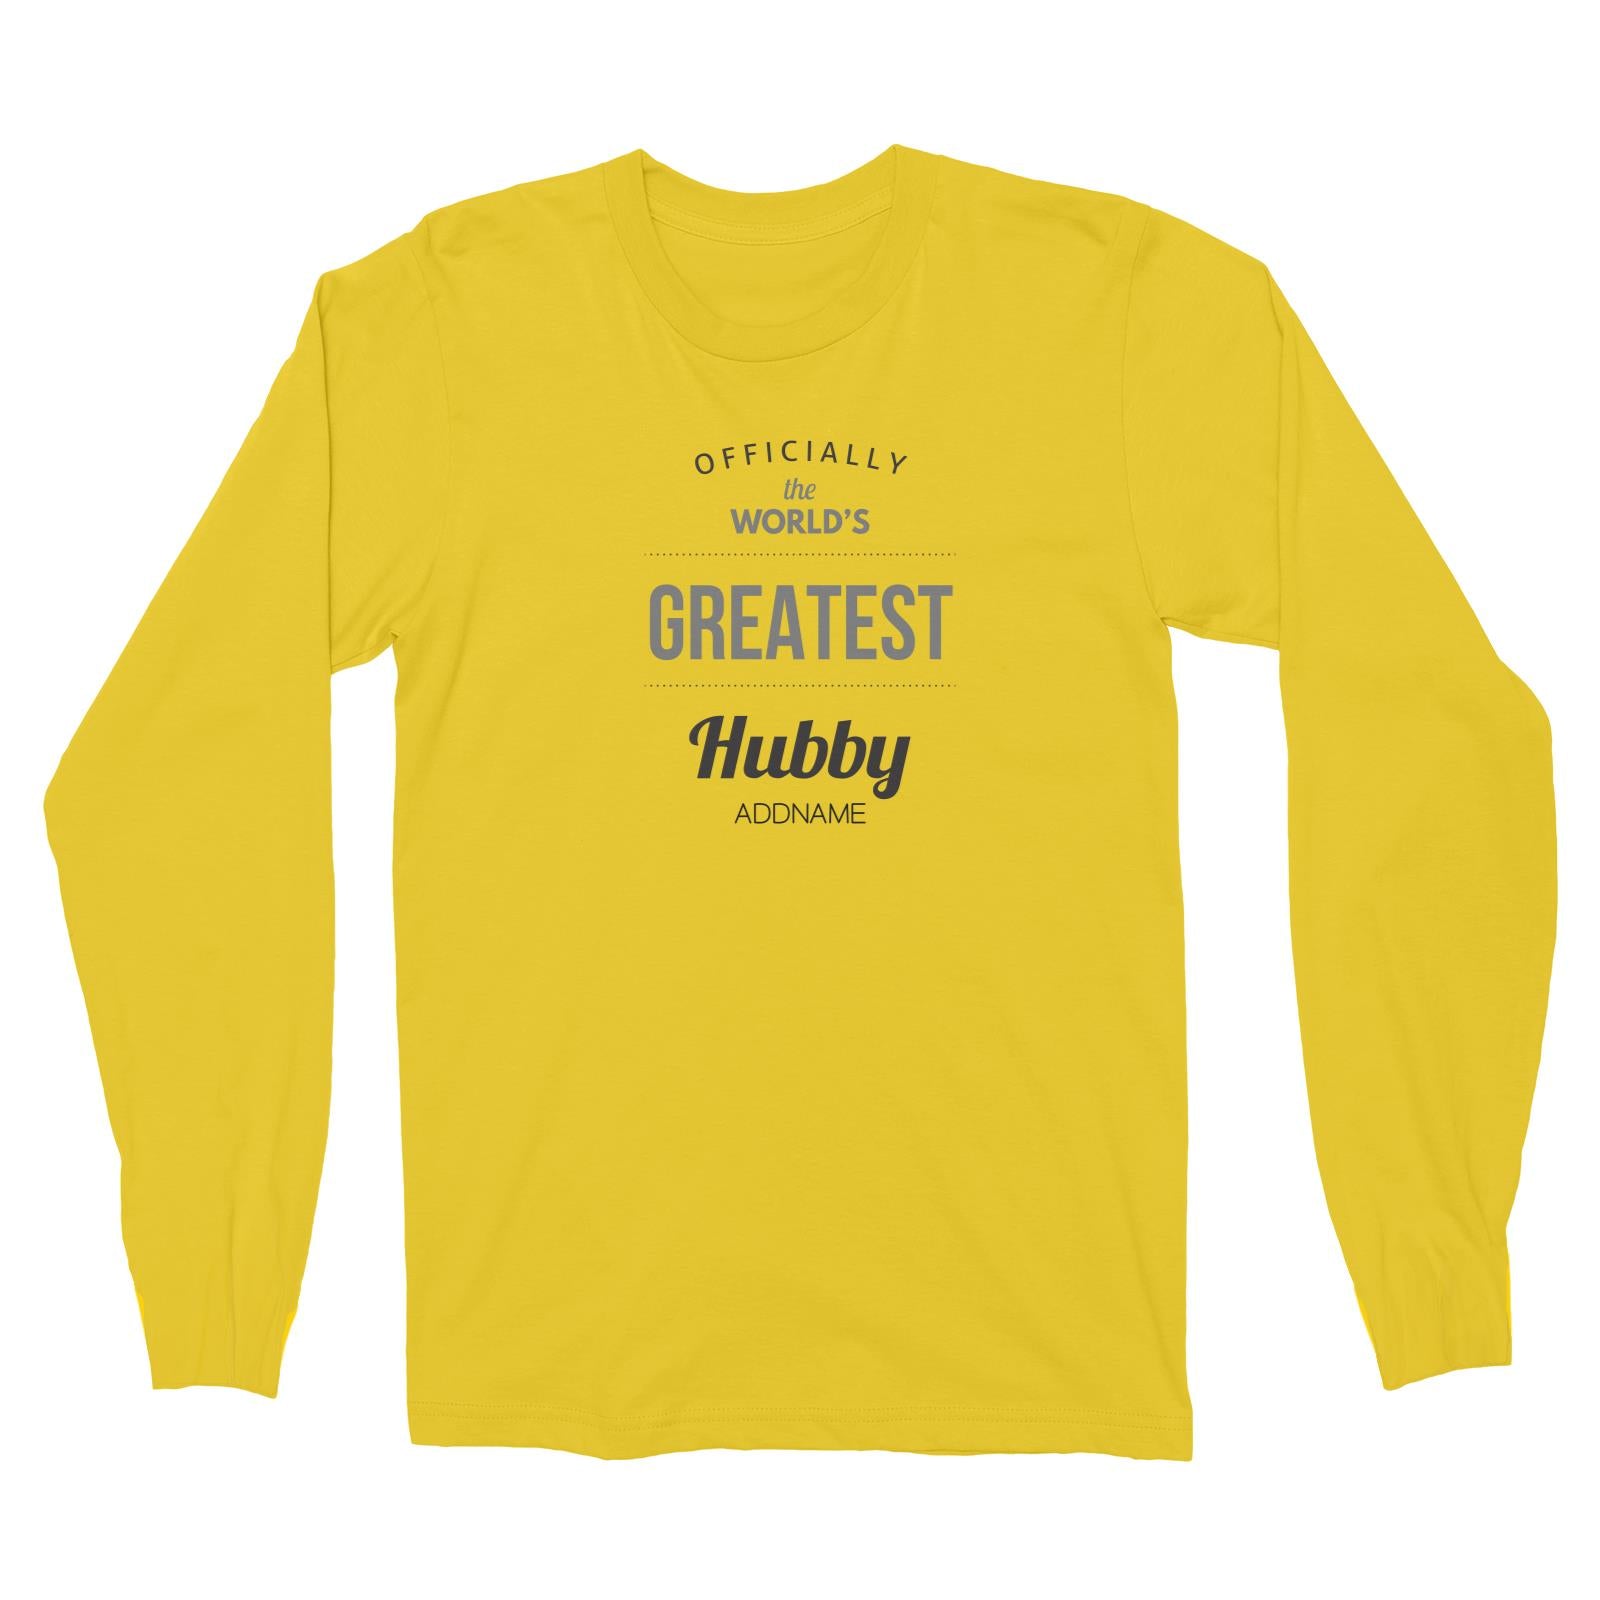 Husband and Wife Officially The World's Geatest Hubby Addname Long Sleeve Unisex T-Shirt